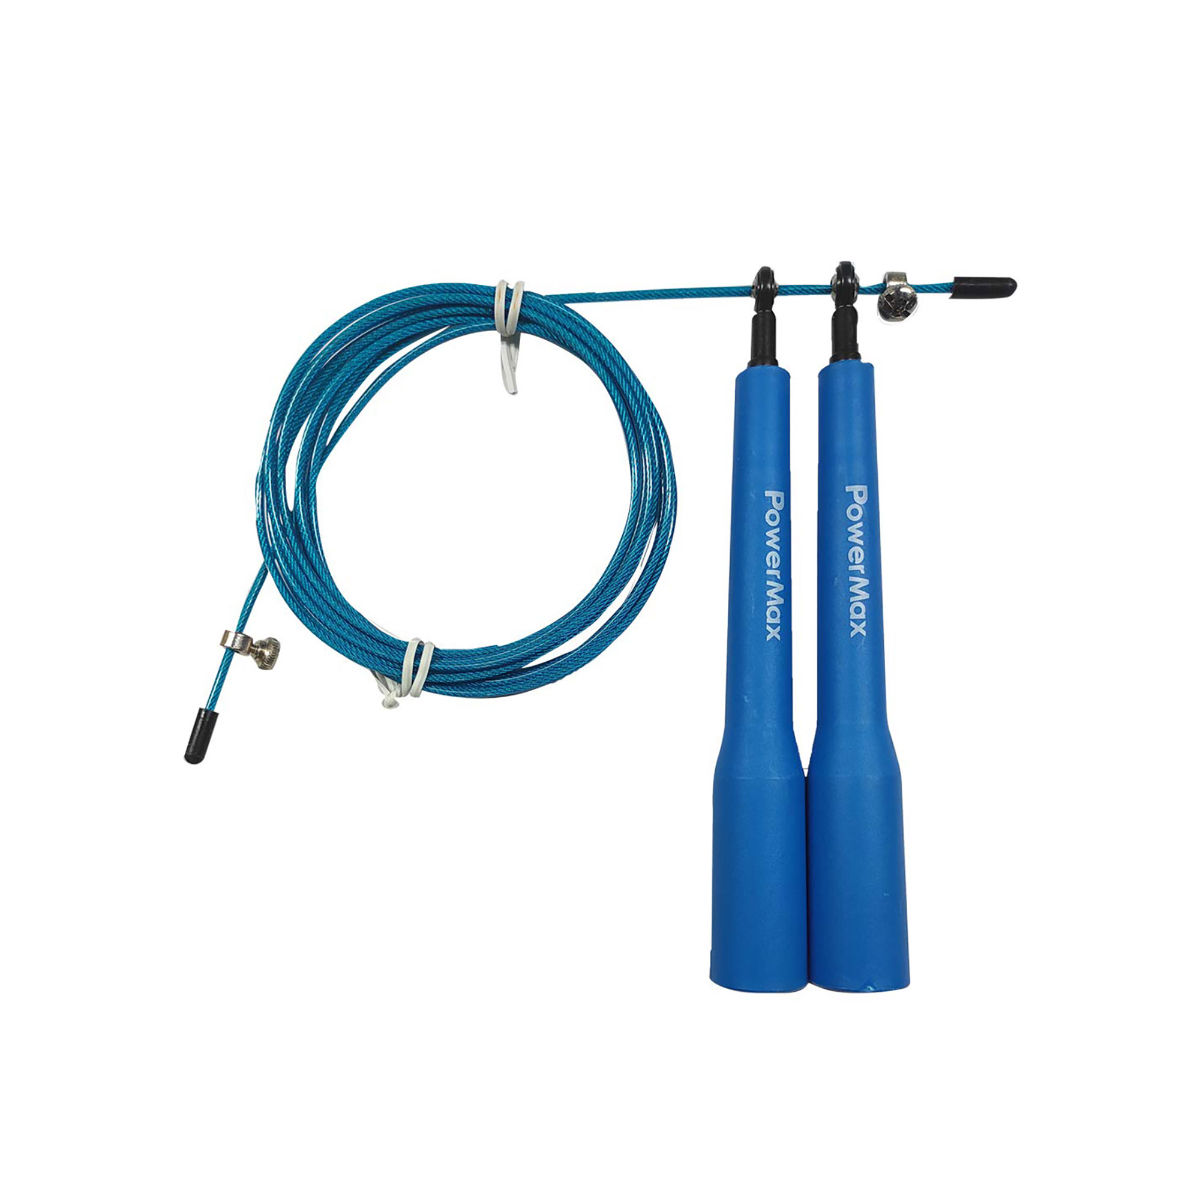 PowerMax Fitness JP-5 (Blue) Exercise Speed Jump Rope With Adjustable Cable with Anti-Slip Handle